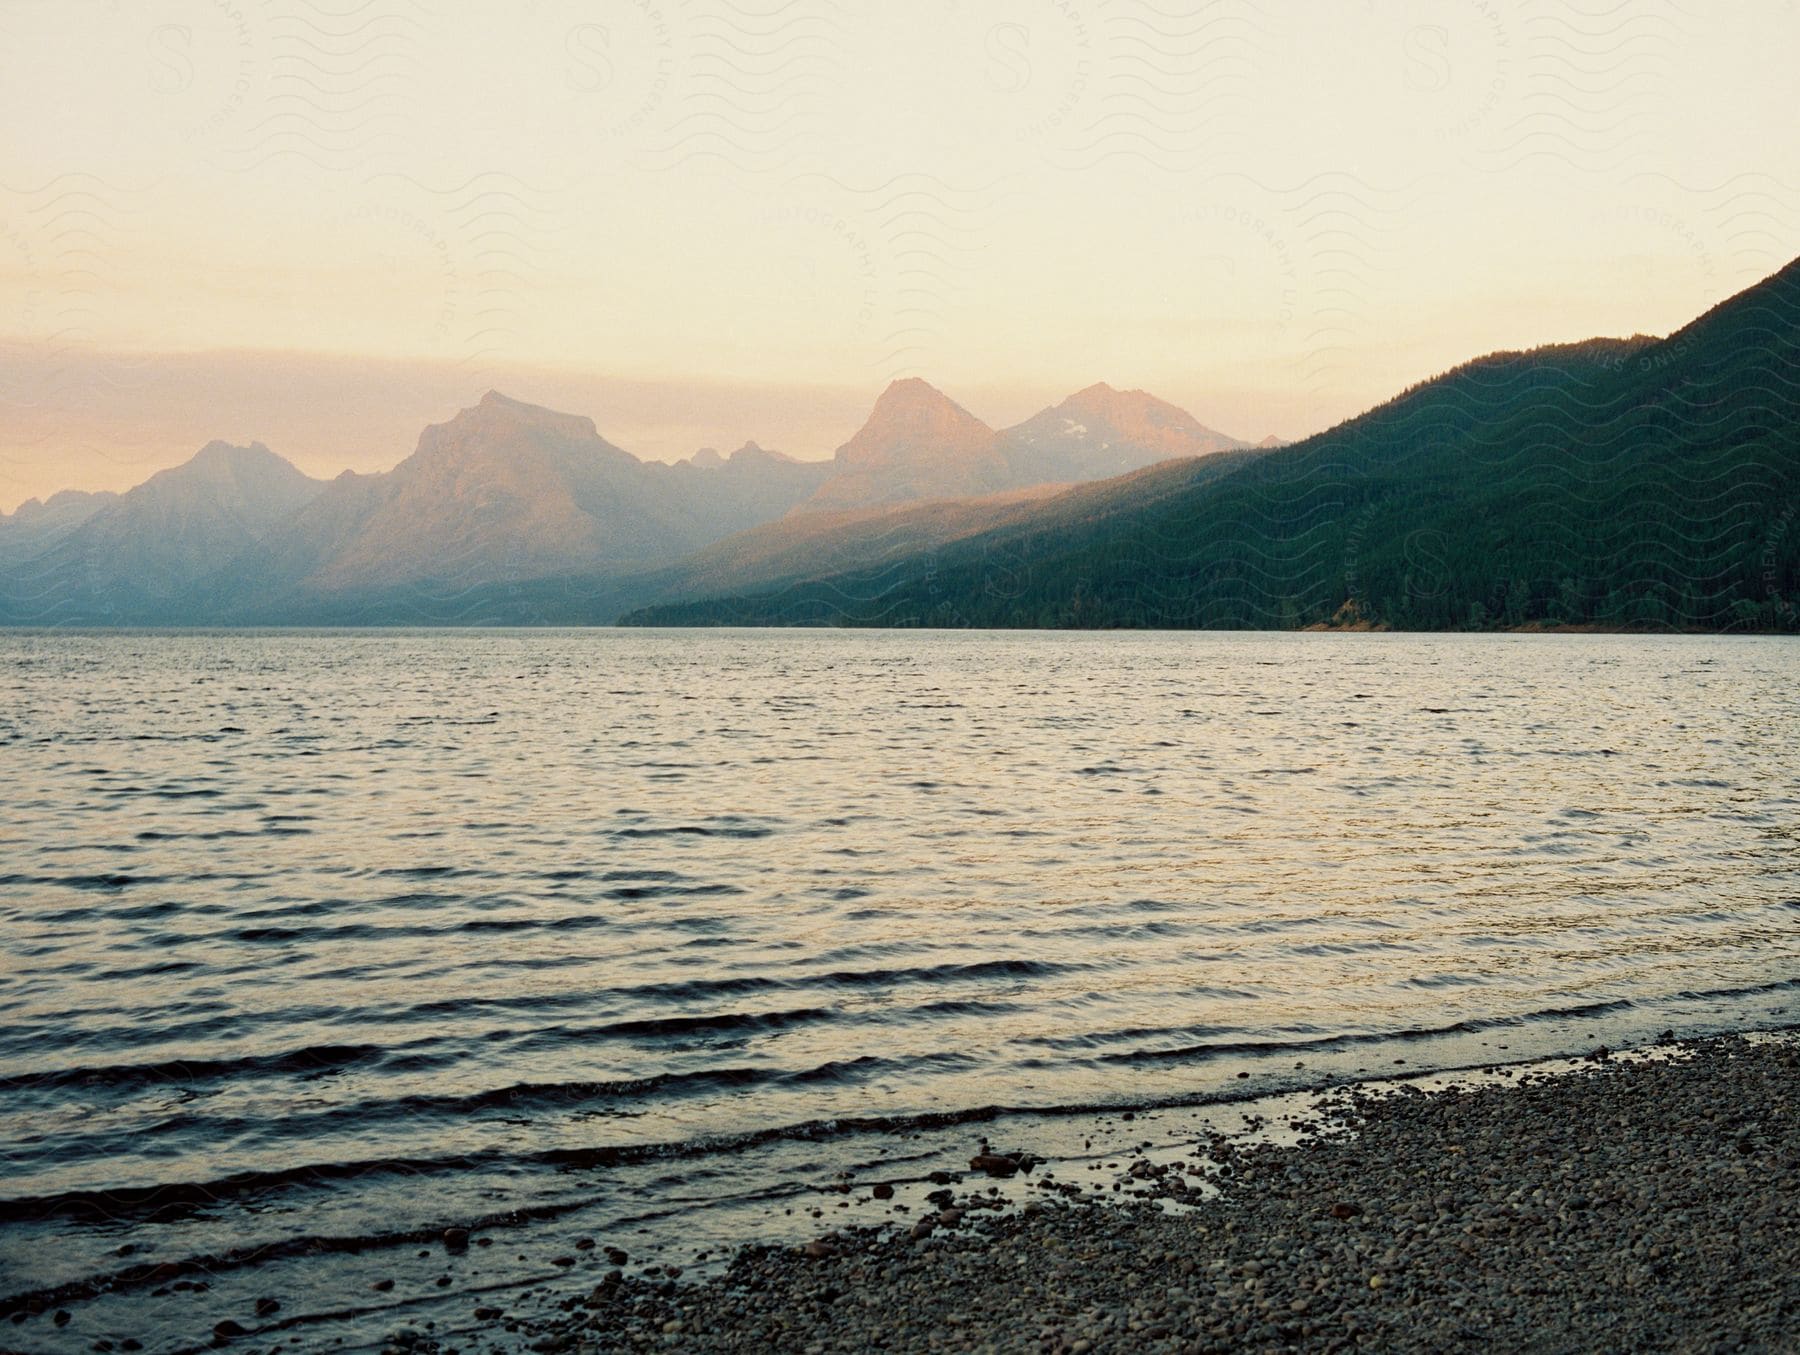 A sunset view of a large lake with mountains in the distance